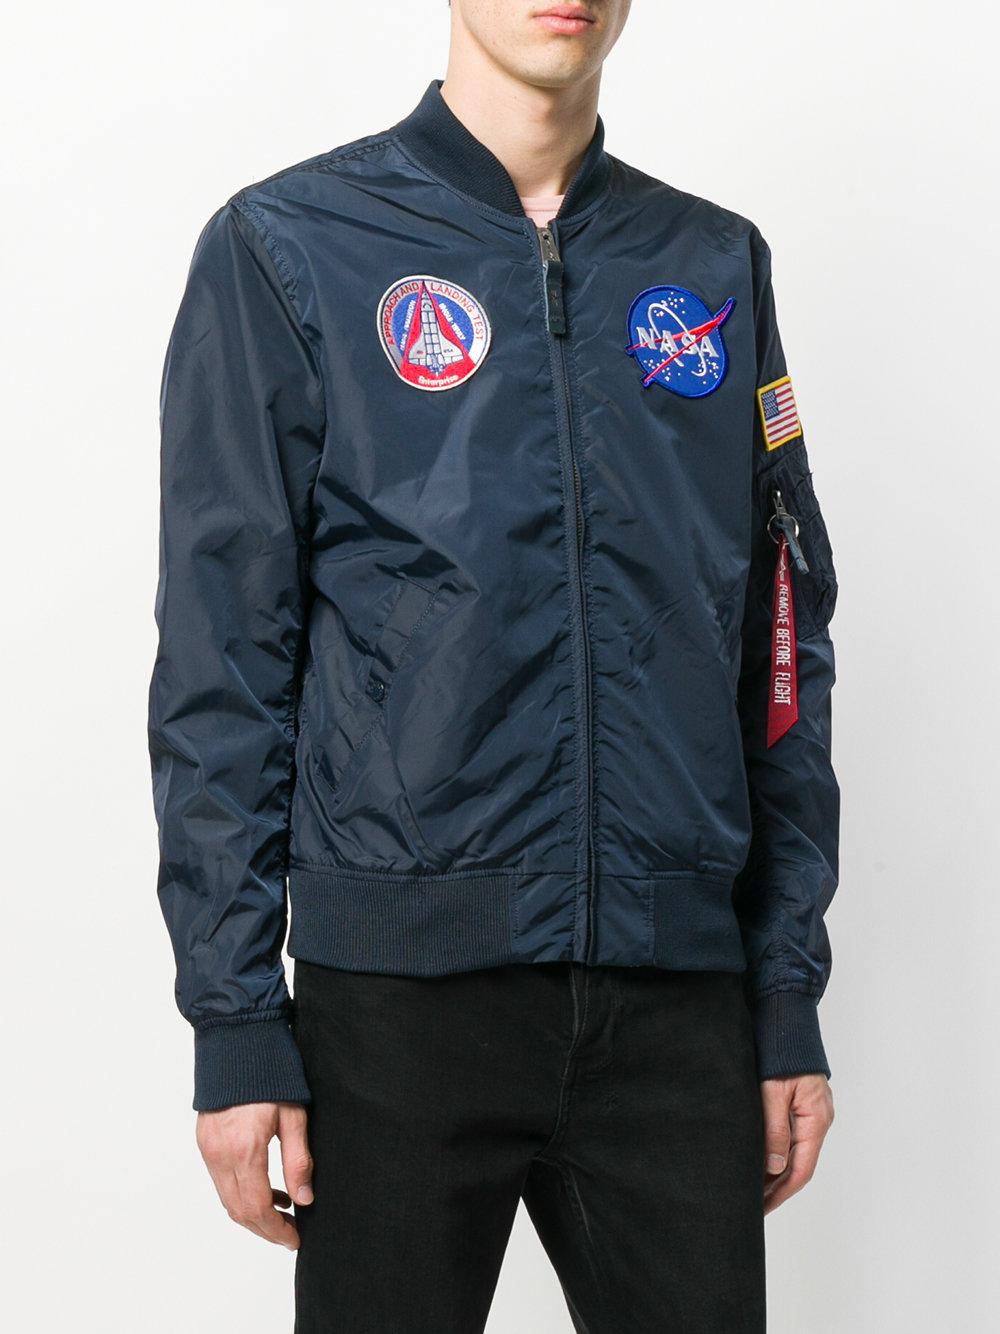 Alpha Industries Nasa Patch Bomber Jacket in Blue for Men - Lyst